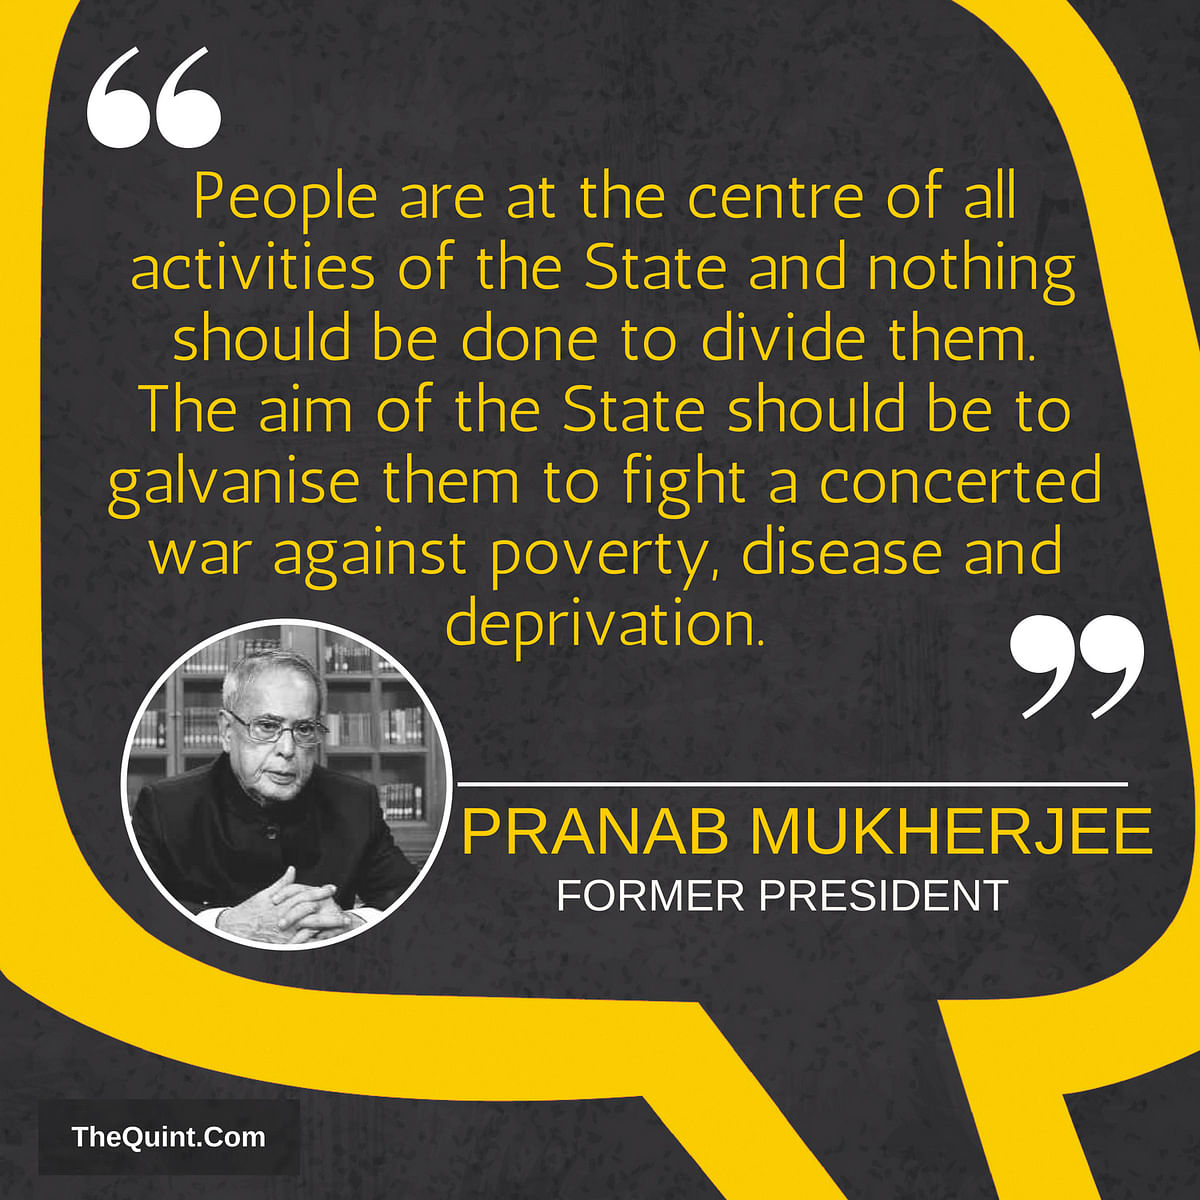 Highlights from Mukherjee’s speech at the RSS event, which was held at Sangh’s headquarters in Nagpur.